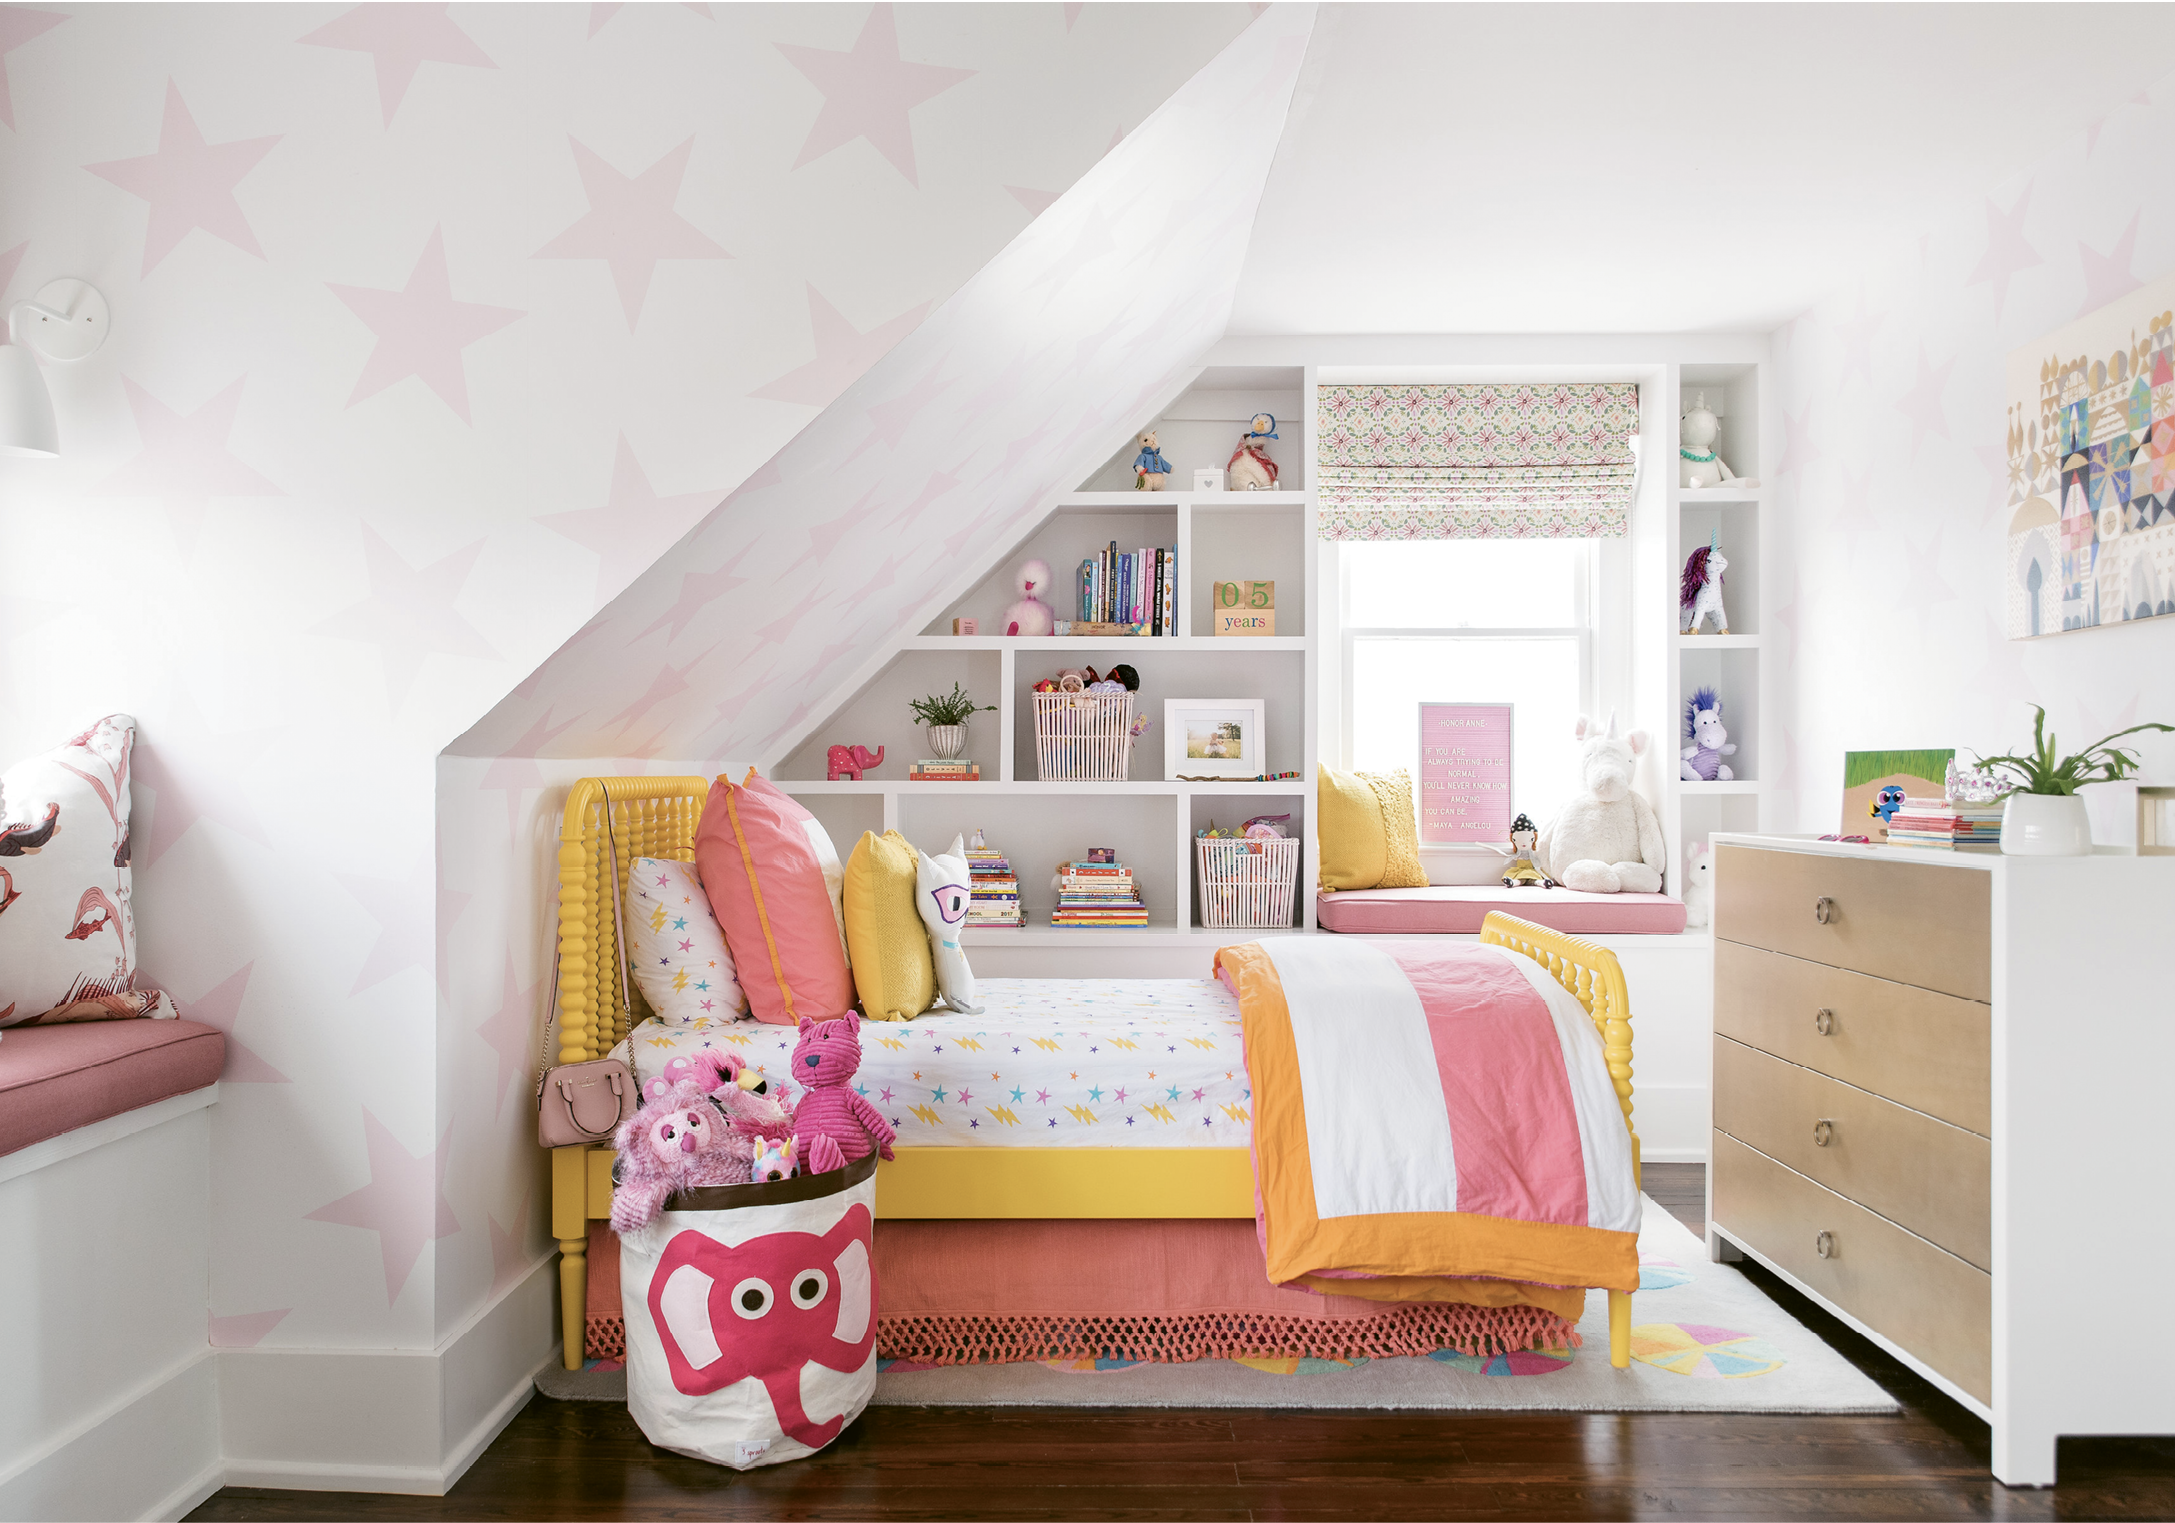 HAPPY DAYS - The third floor houses Honor and Finn’s rooms and their cheerful bath. “I feel like we did a good job at giving these a magical feeling, a place for them to be little kids,” says Parker. Playful wallpaper—Sissy+Marley’s “Lucky Star” for her